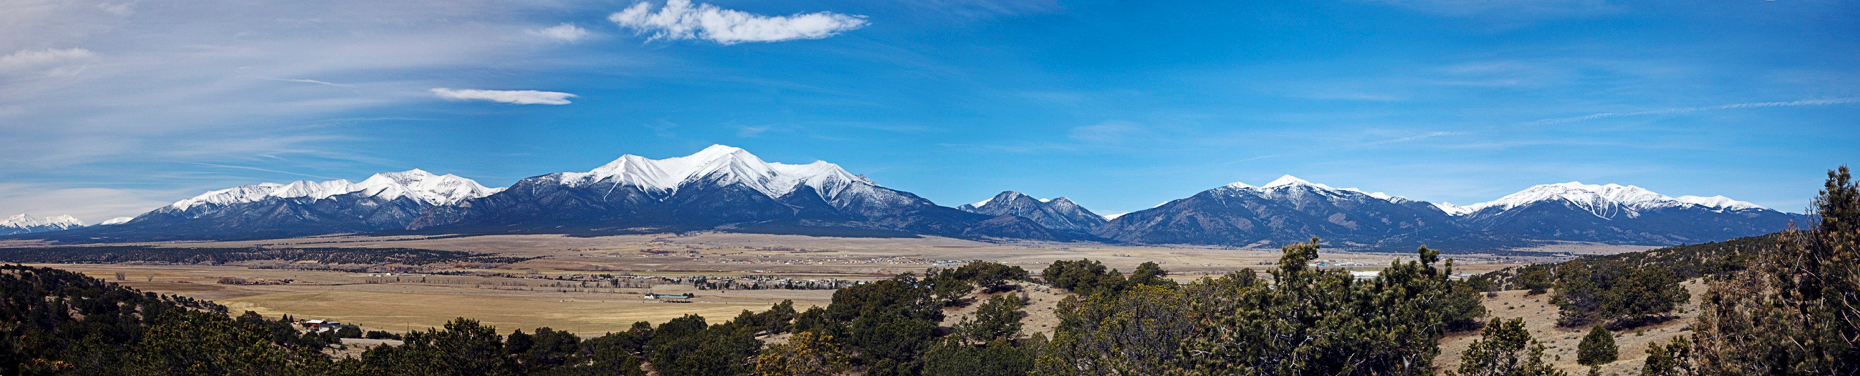 Panoramic view to the west of the Collegiate Peaks from near Rt. 285 and Buena Vista, Colorado, USA